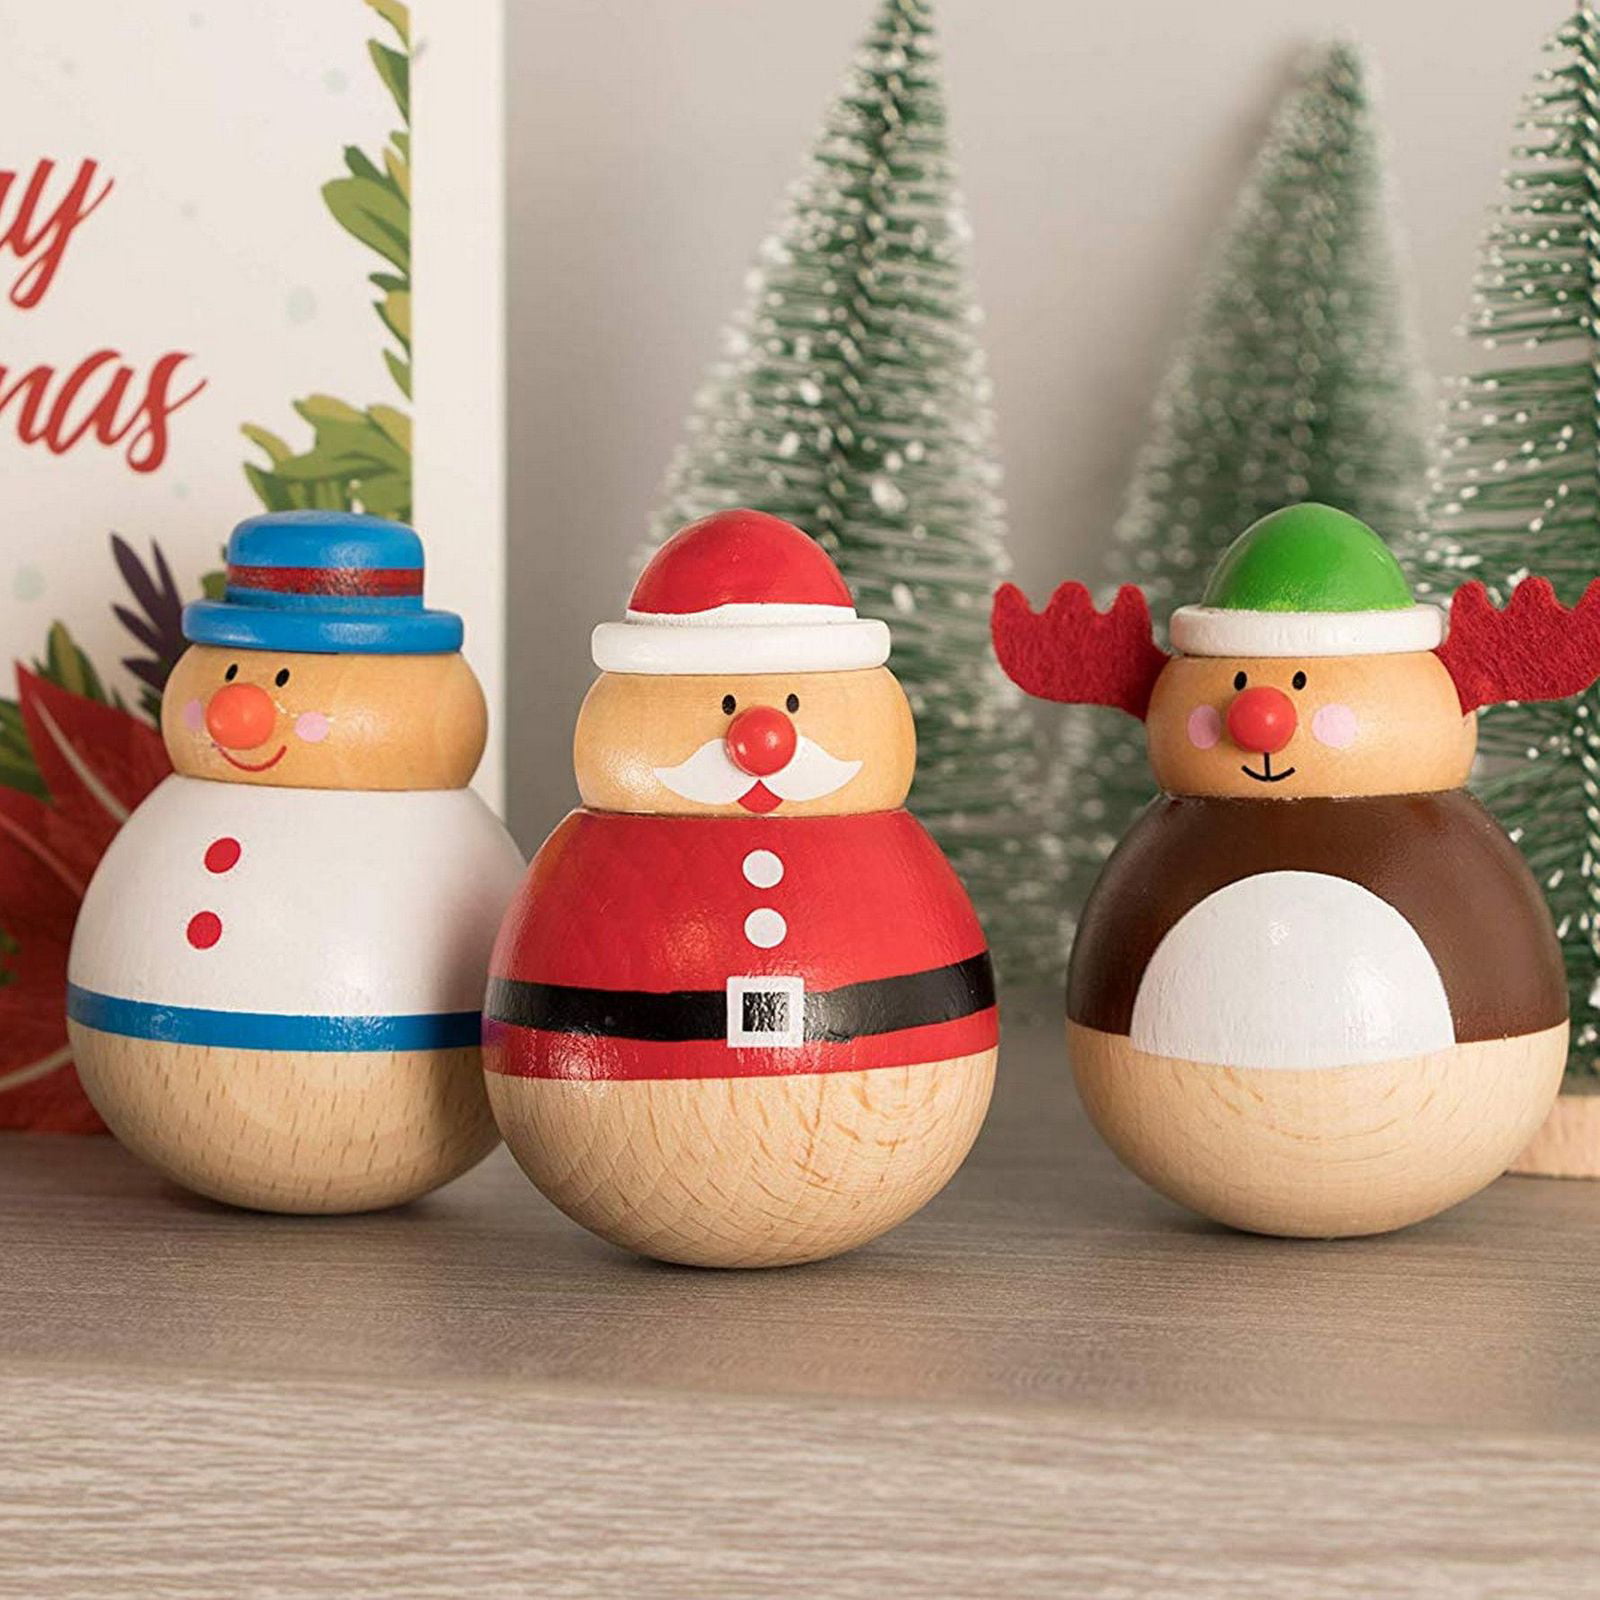 Snowman Reindeer Santa Design Christmas Roly Poly Toy 3-Pack Wooden Tumbler Doll Figurines Home Holiday Doll Decoration Desk Top Table 1.64 x 1.64 x 2.3 Inches Office